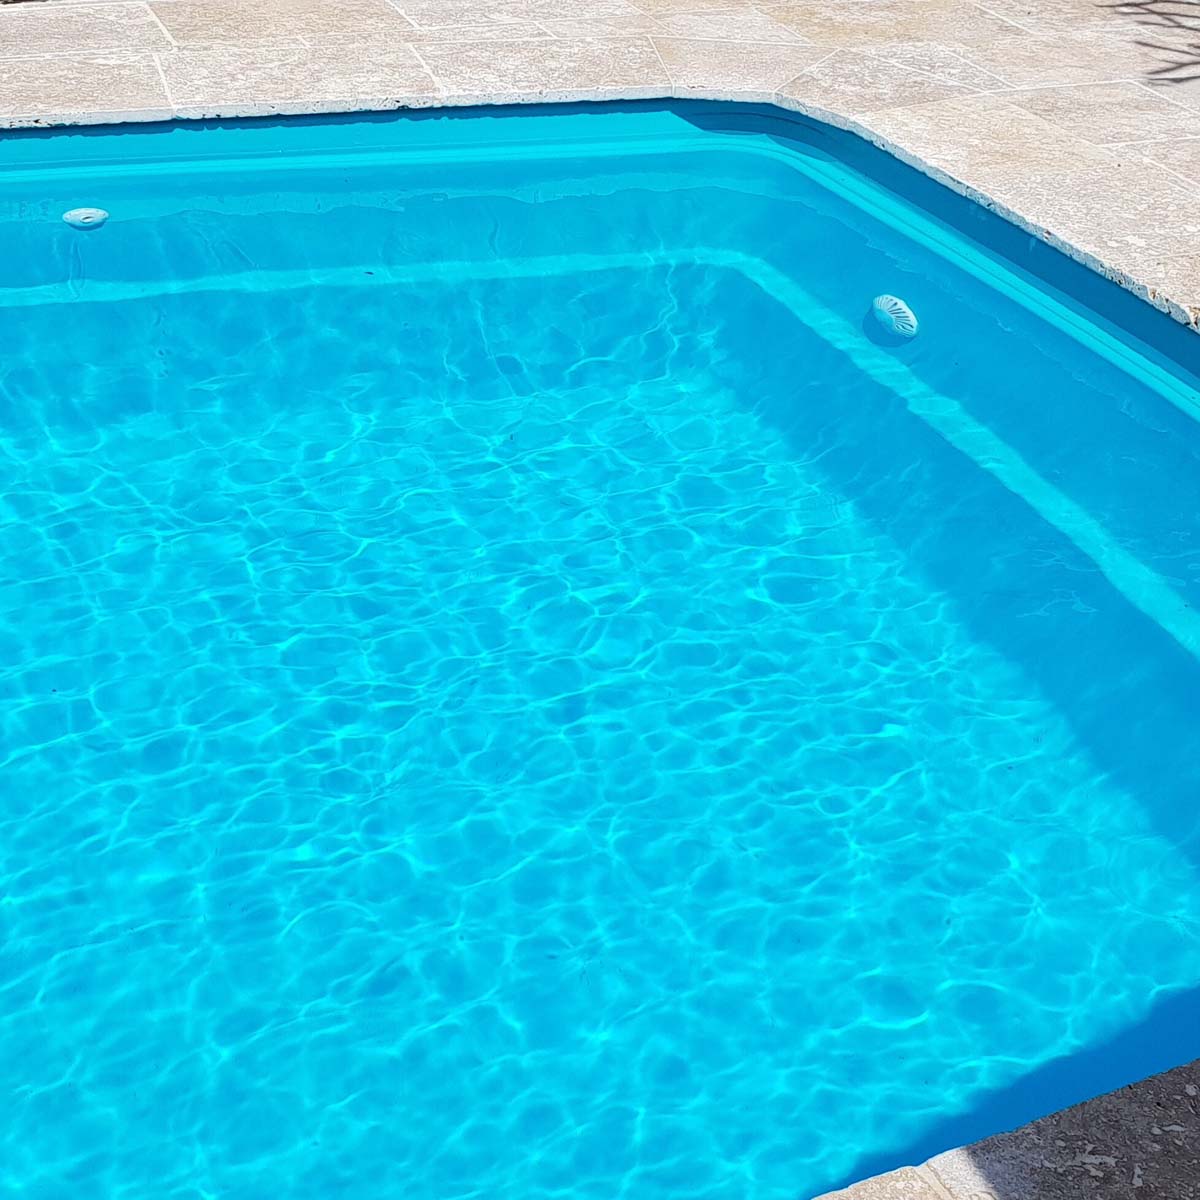 Residential pool painted in LUXAPOOL Epoxy Turquoise_colour by DIYer Timothy Grant with the water in